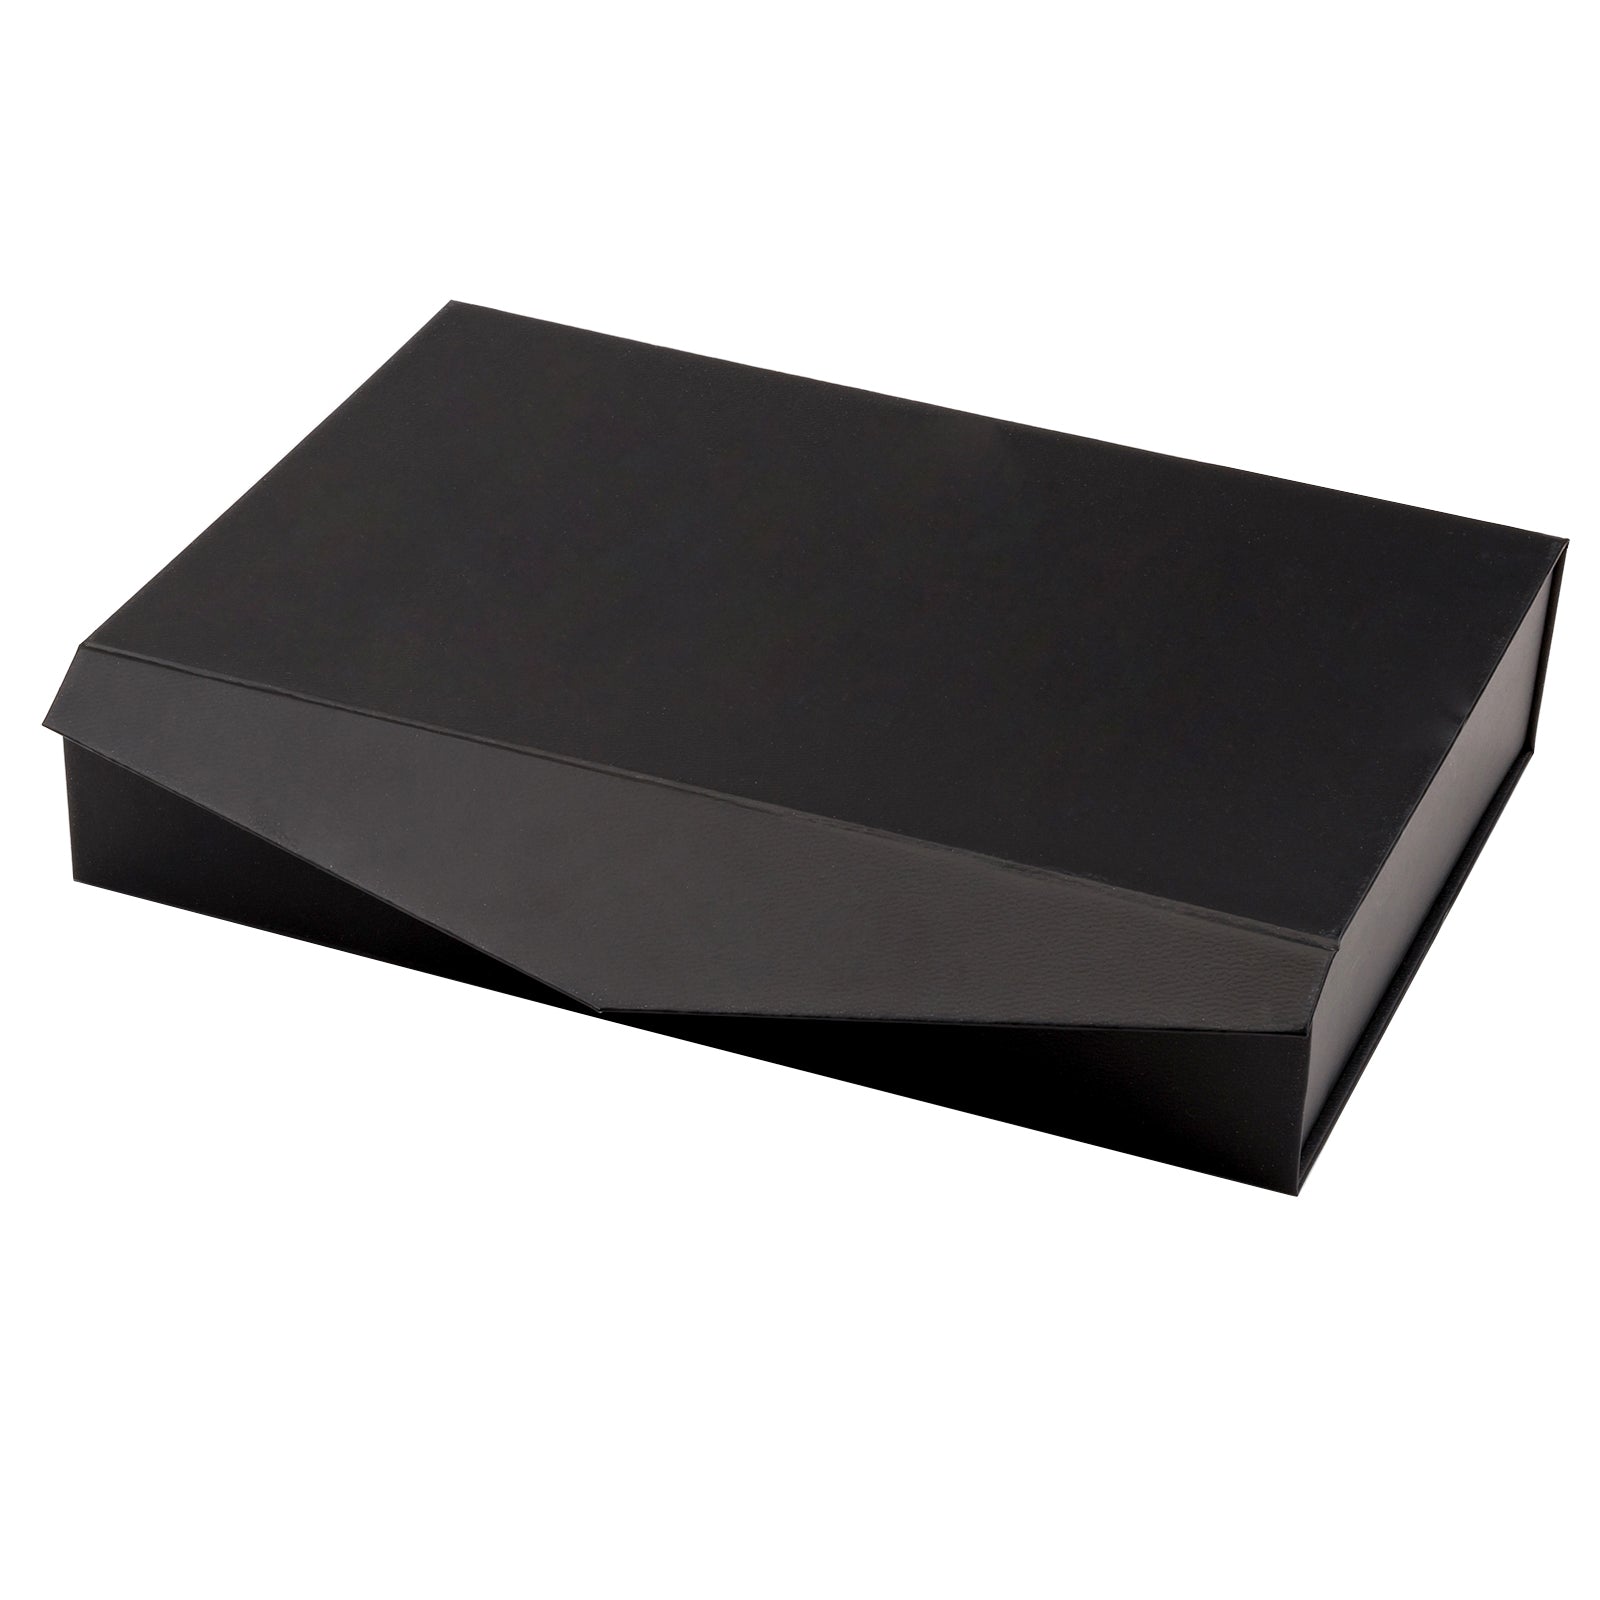 10x7x2.4 inch Collapsible Gift Box with Magnetic Closure